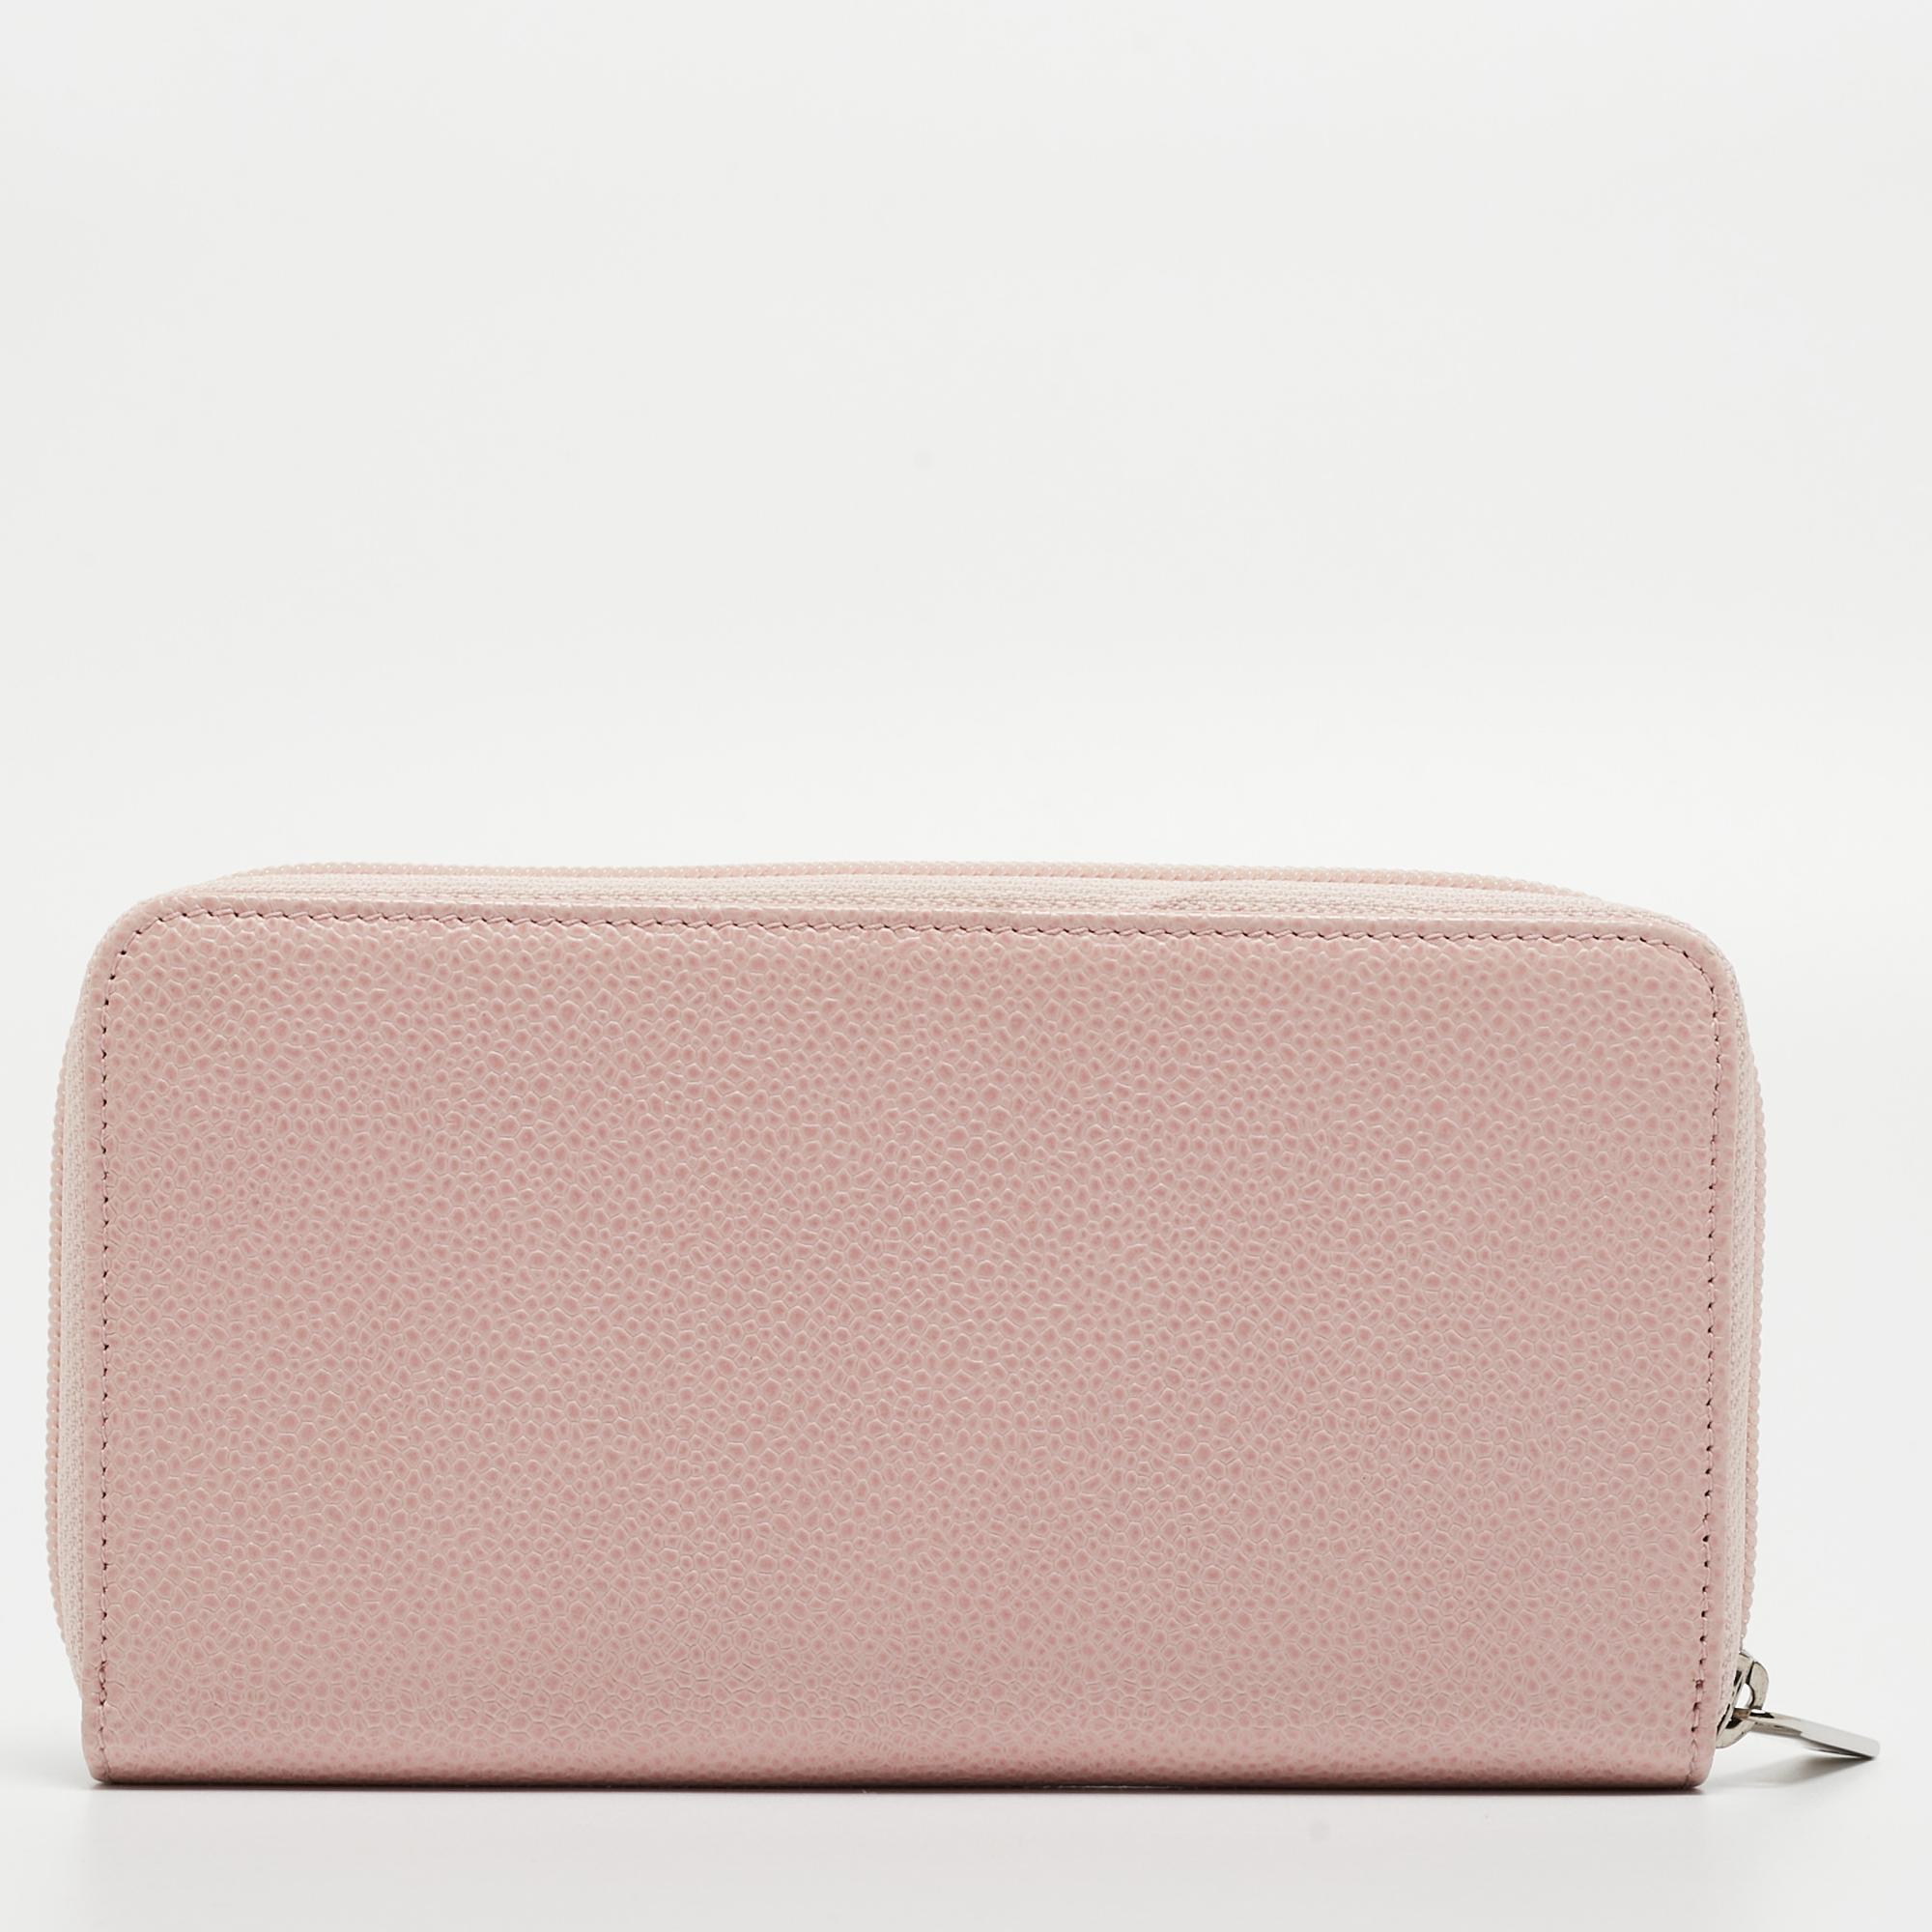 Keep your monetary essentials safely in this wallet from the House of Chanel. It is made from pink caviar leather on the exterior, with an embossed CC logo decorating the front. The zip-around feature opens to a leather-fabric interior. This Chanel